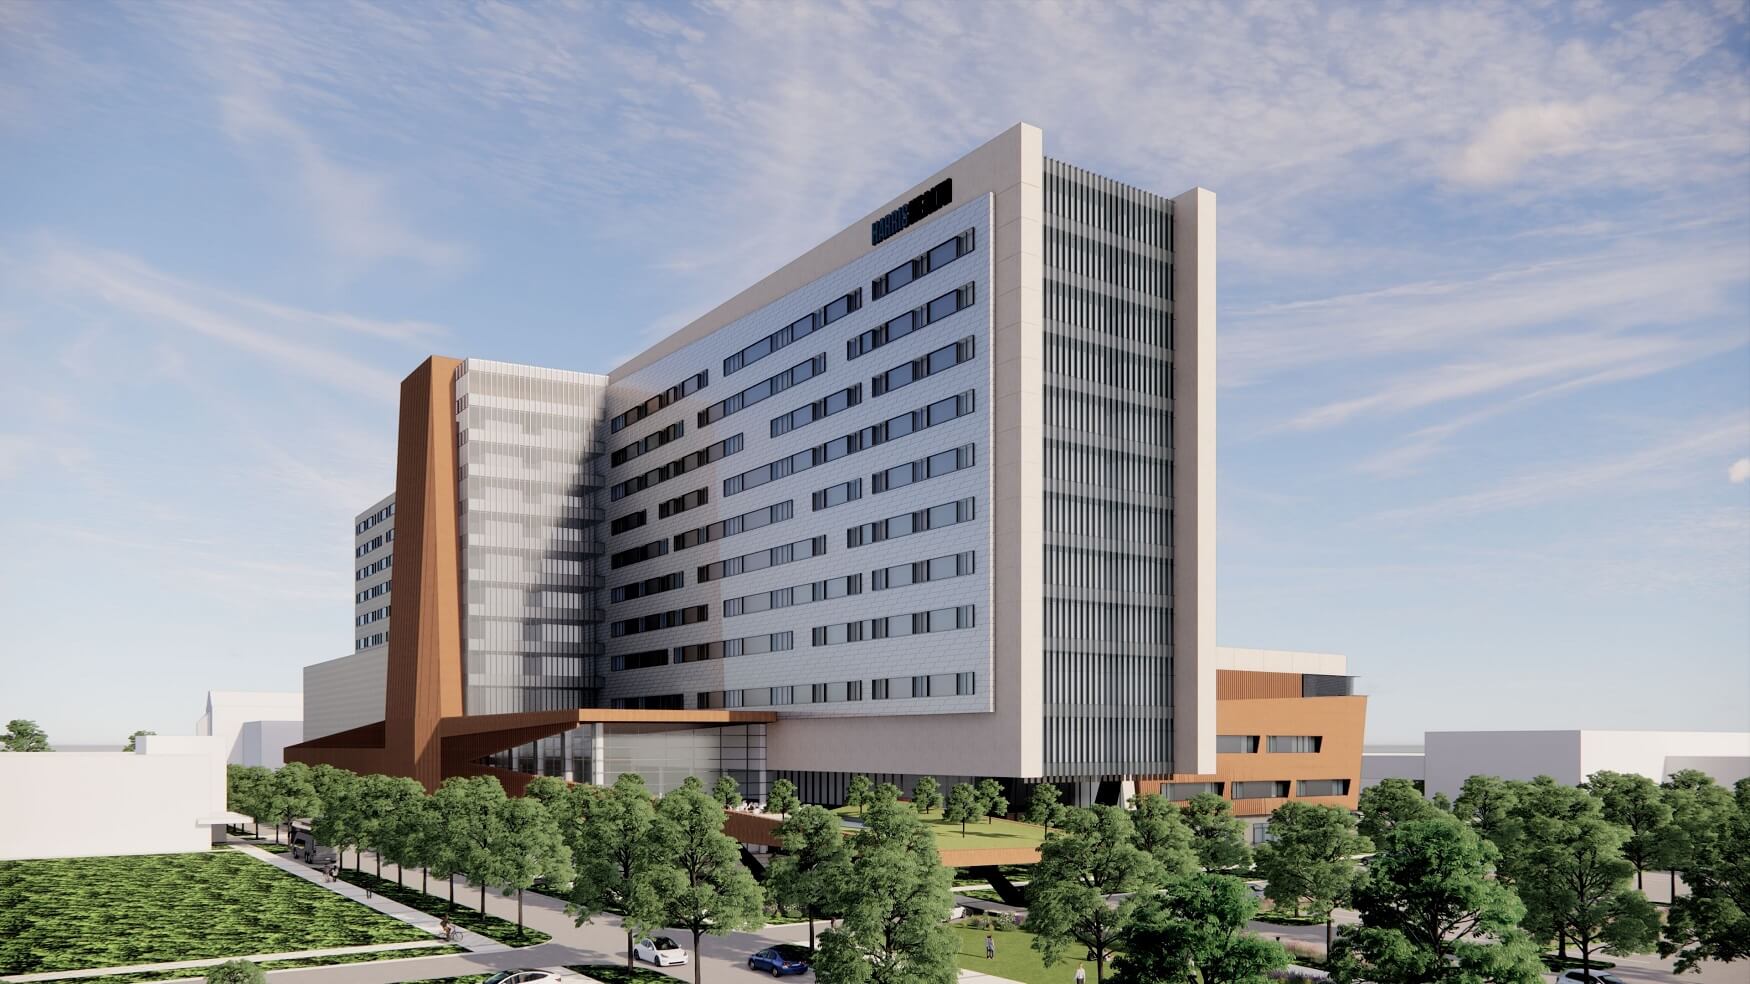 Voters approve $2.5B Harris Health bond issue to renovate, expand LBJ hospital and clinics